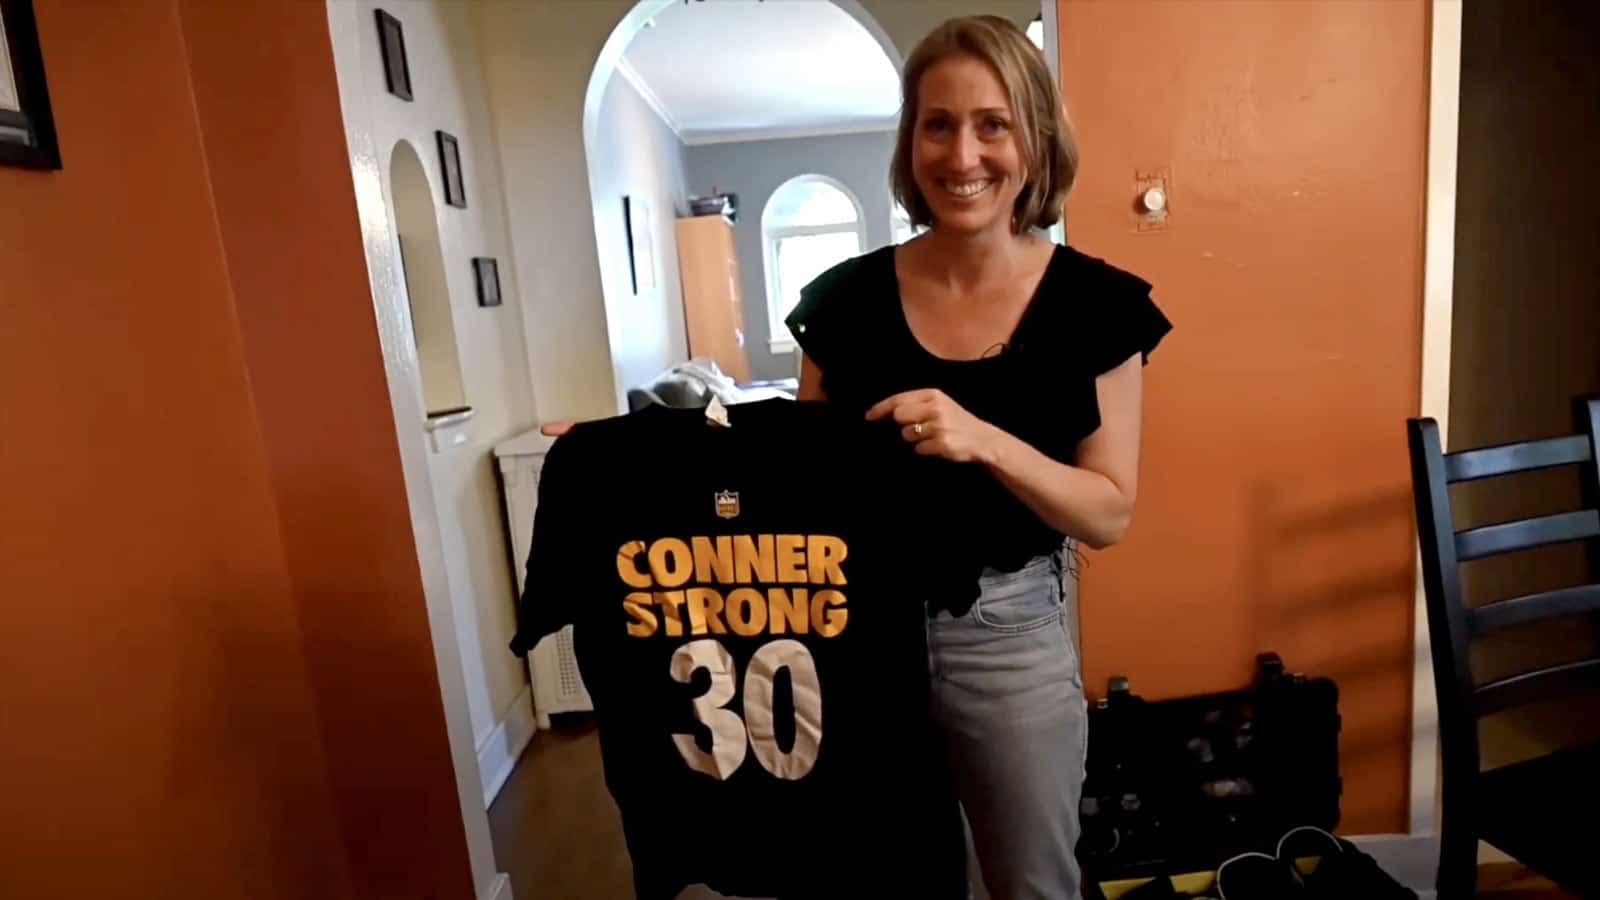 Carrie Richards wins 2022 James Connor Courage Award